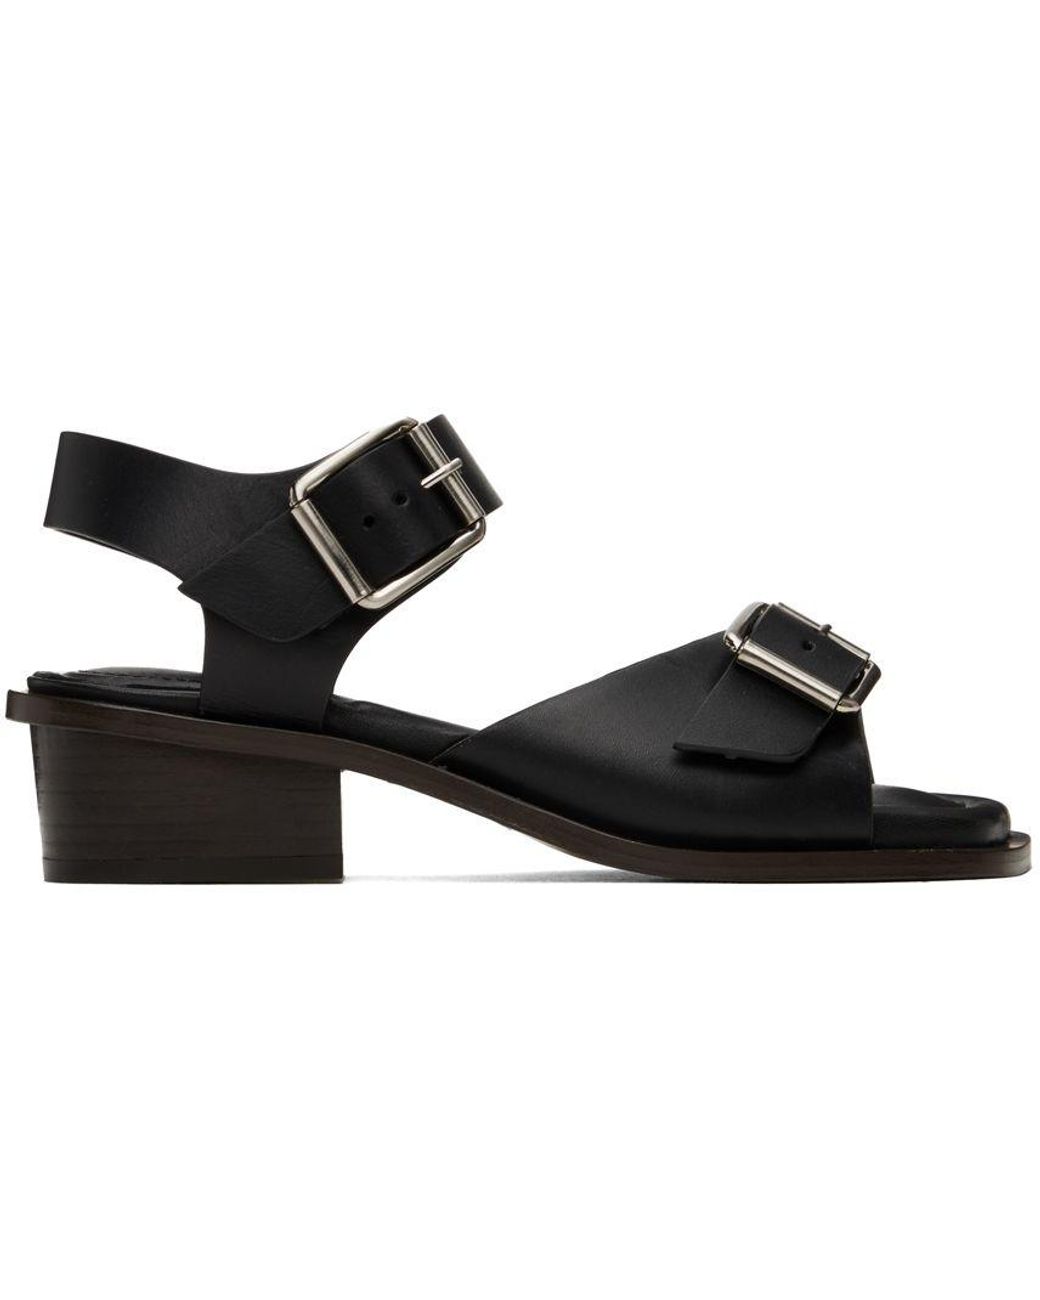 Lemaire Black Square Heeled 35 Sandals | Lyst